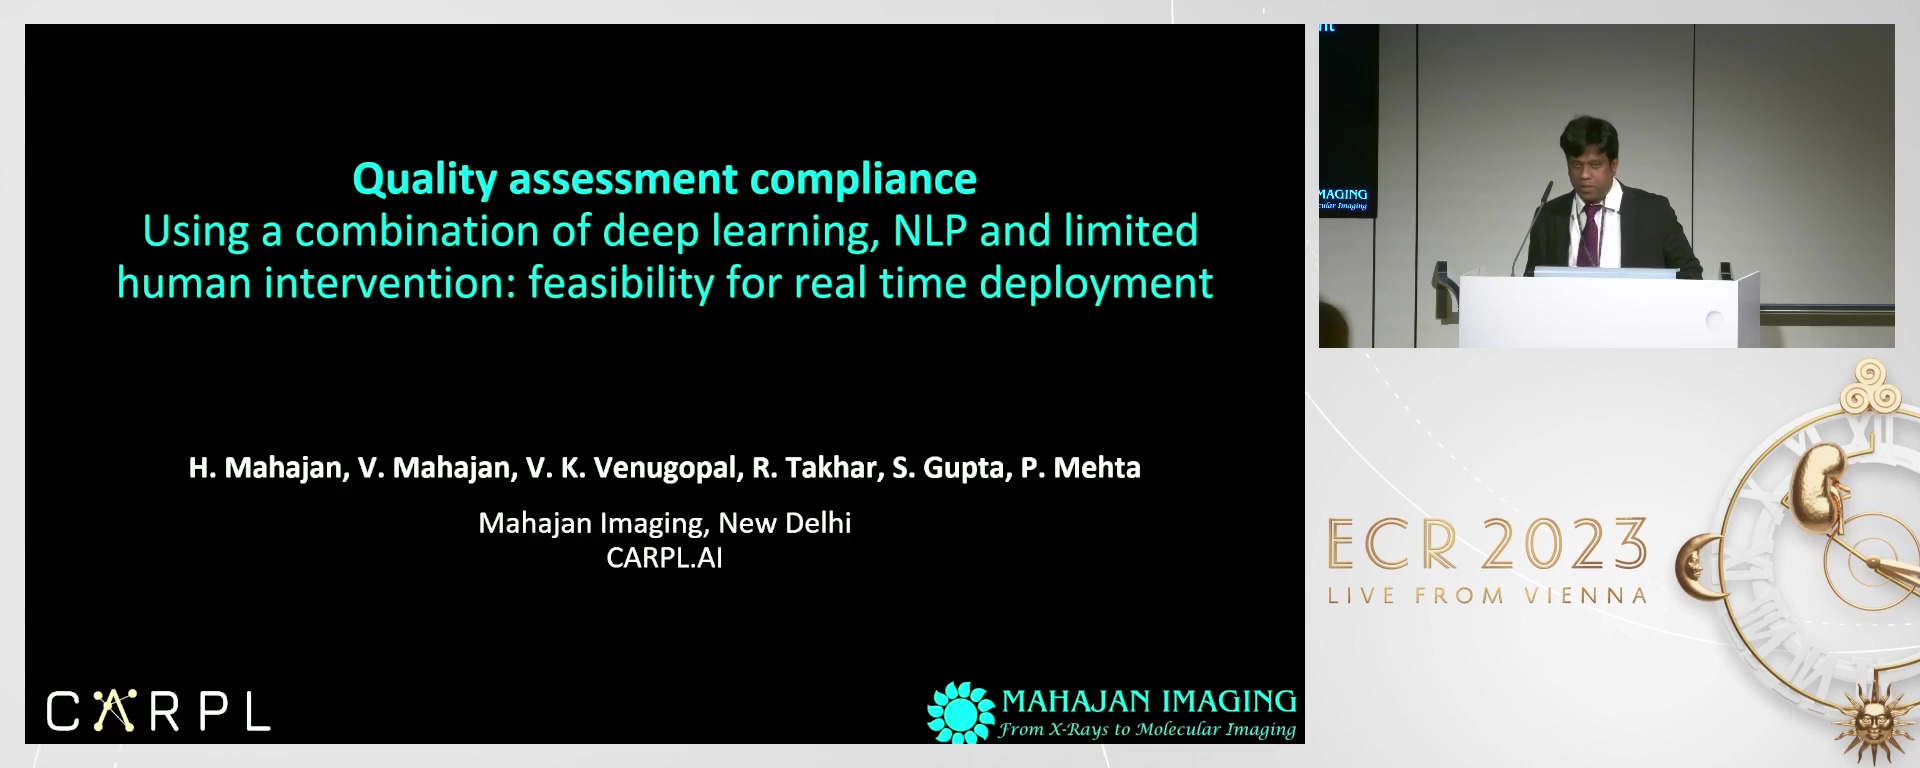 Quality assessment compliance using a combination of deep learning, NLP and limited human intervention: feasibility for real time institutional deployment